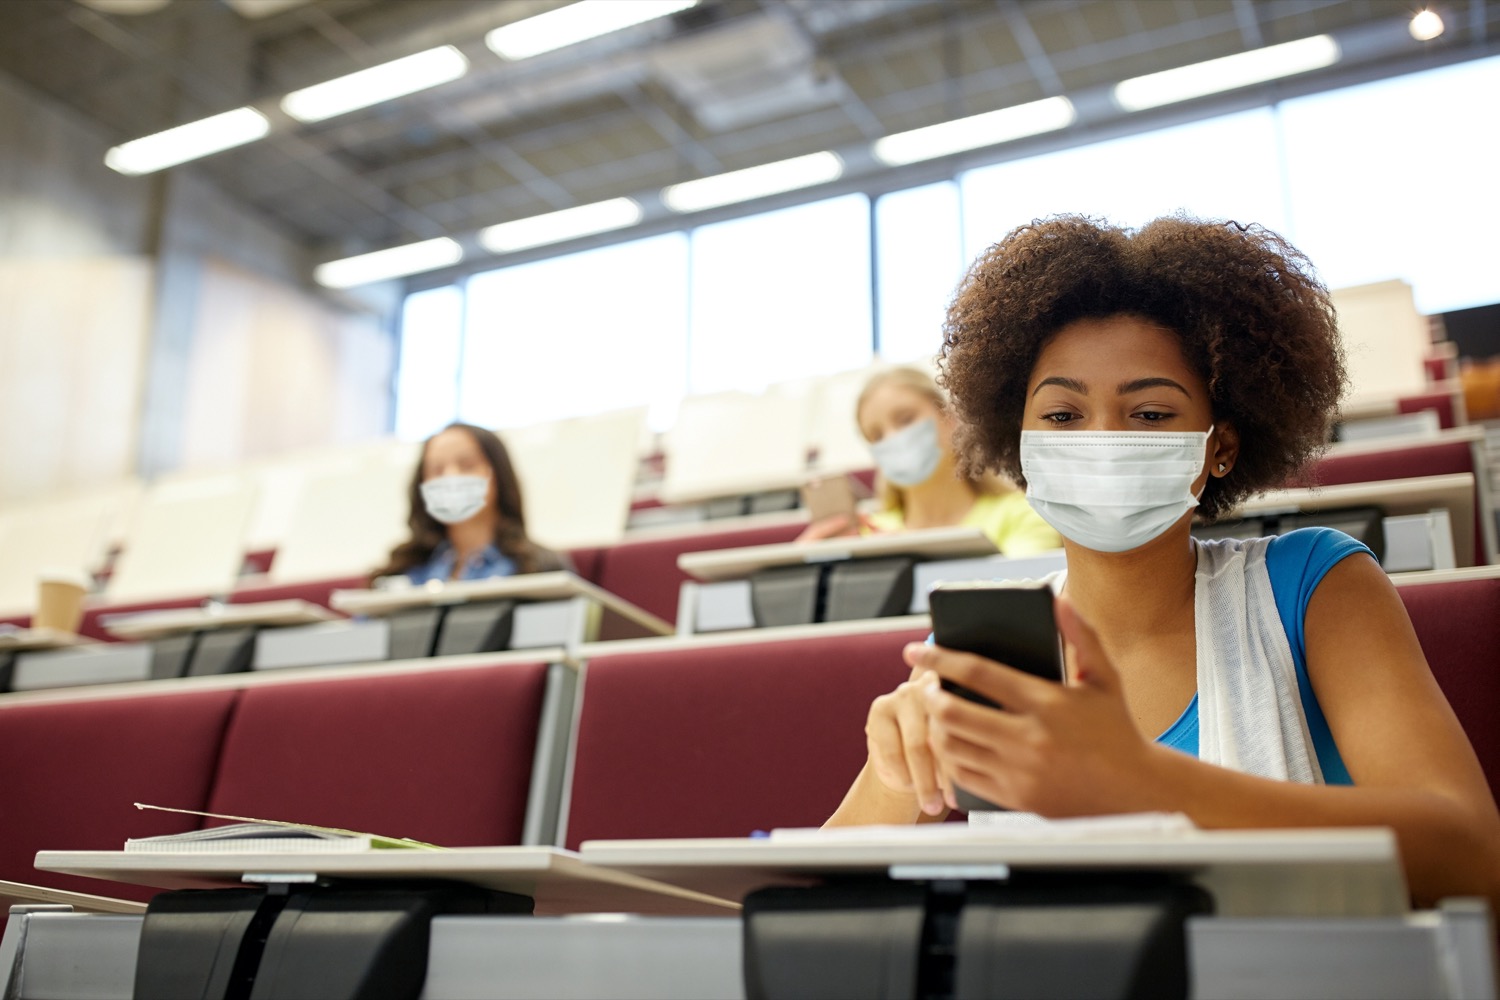 three teen students in a classroom all wearing masks. in the foreground a black girl looks at her phone